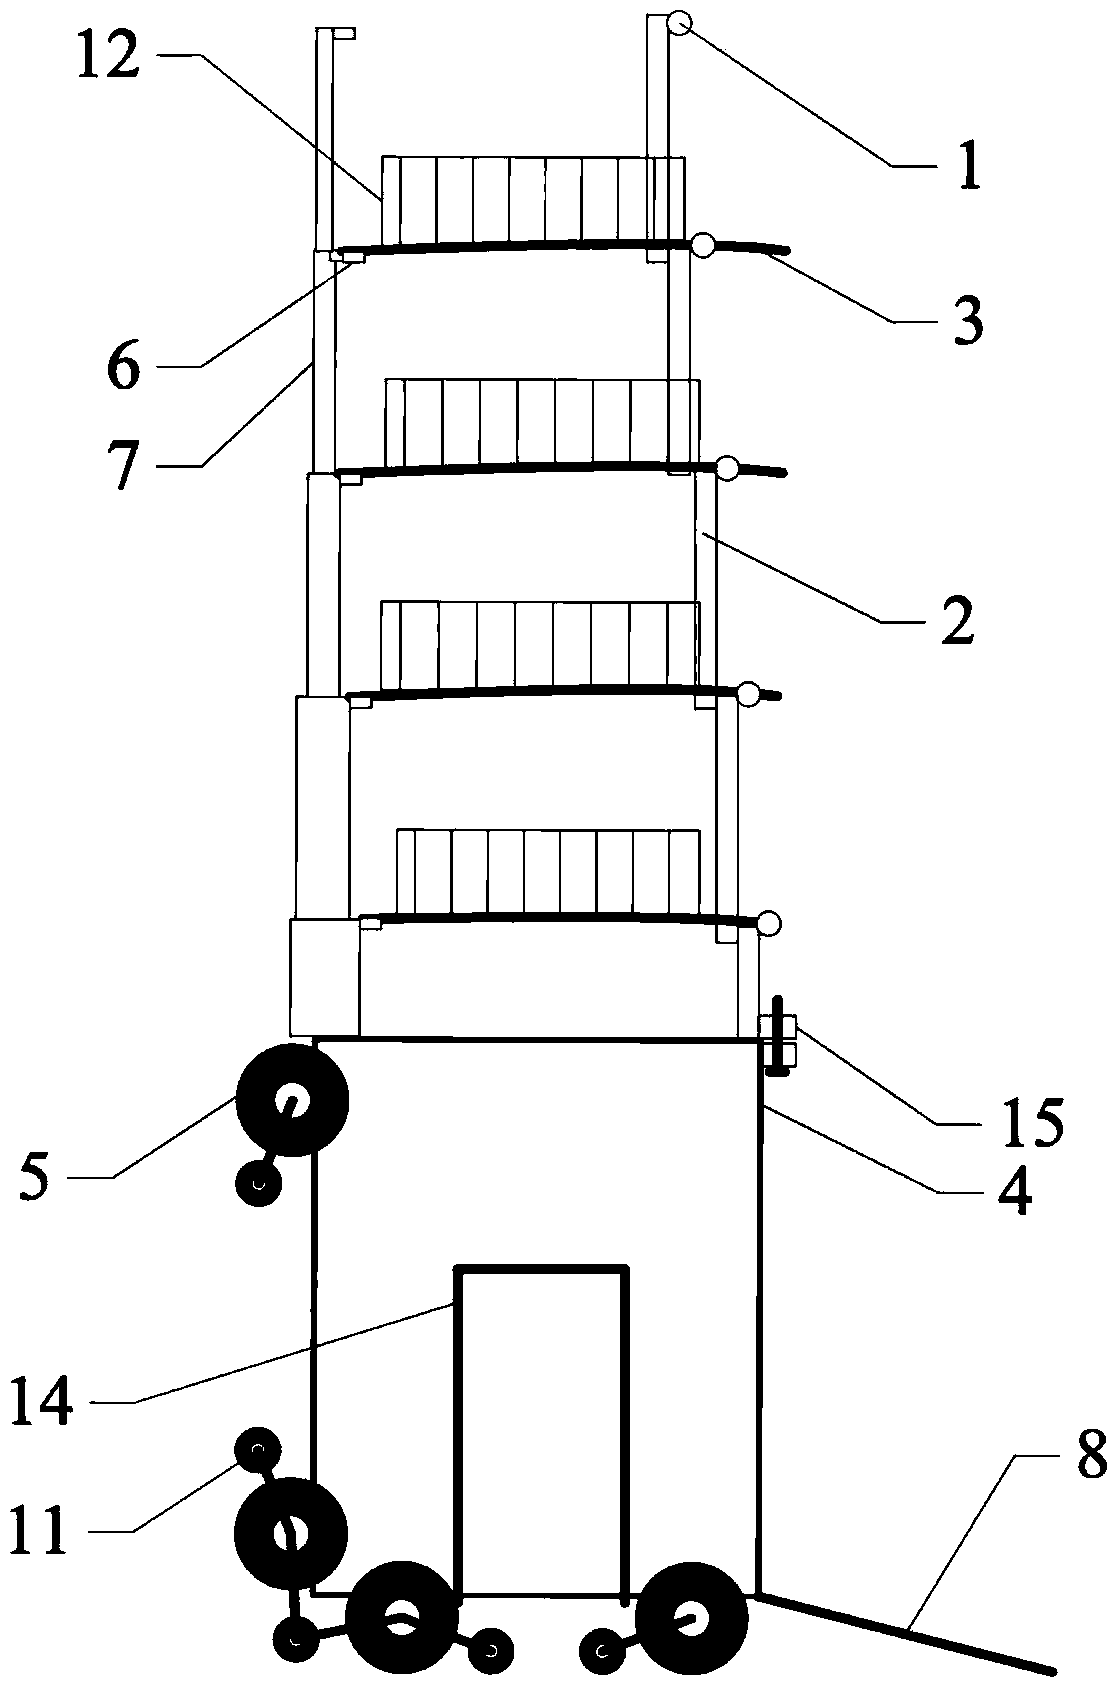 Universal device capable of achieving exchange between boarding bridge and lift